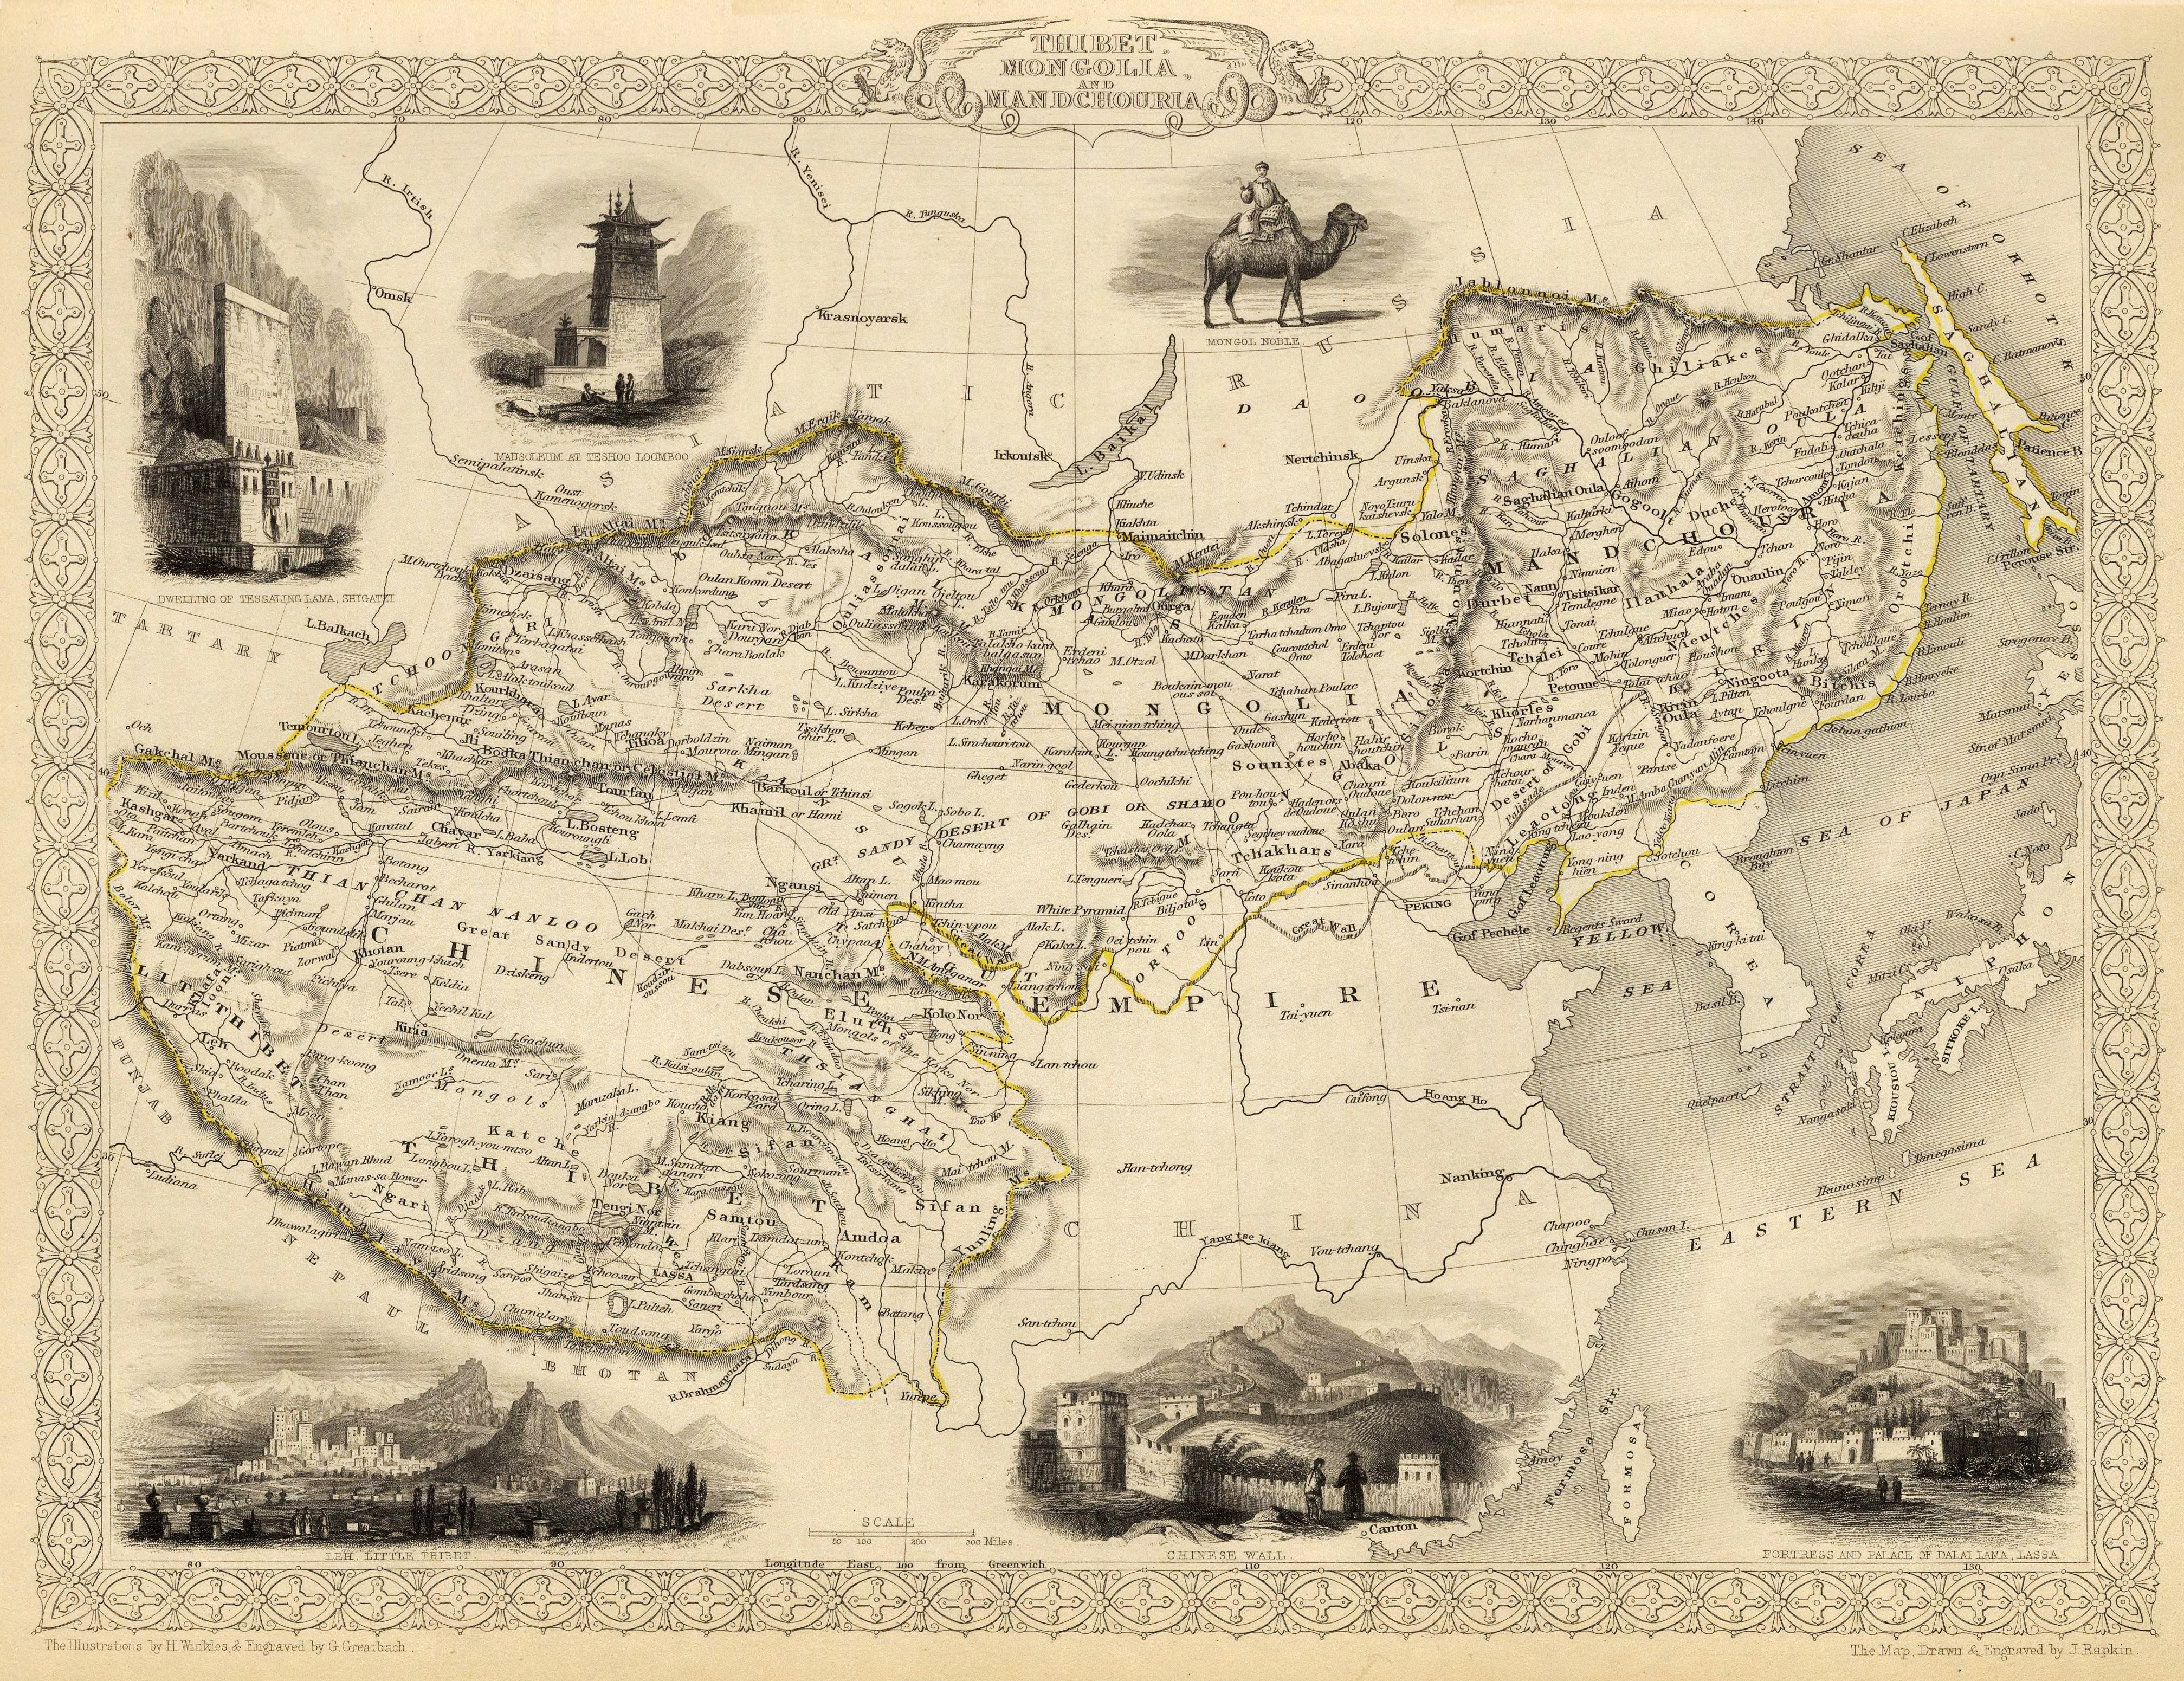 Old map of Tibet. (Source: Wikimedia Commons)